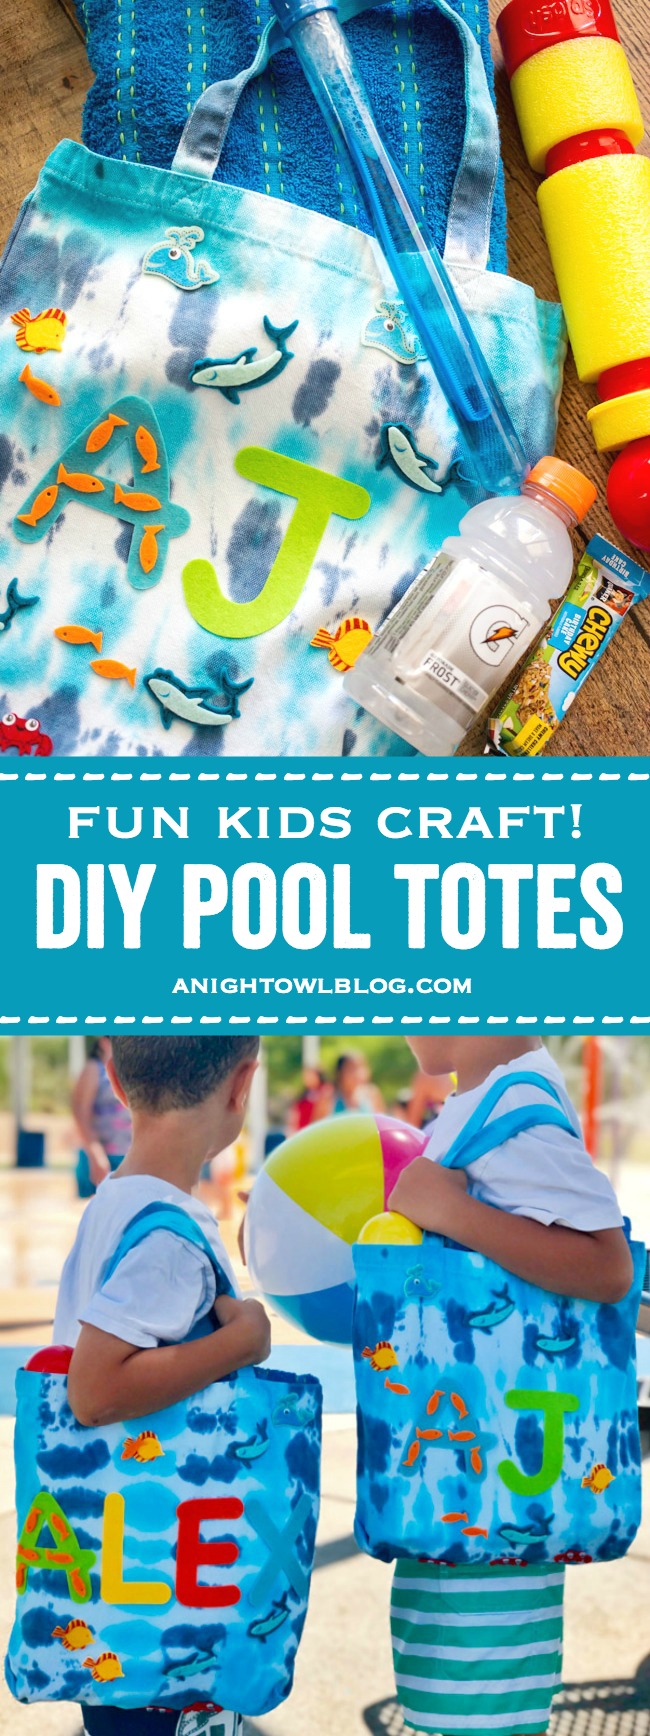 Gearing up for summer? Give the kids something to do that will be useful too, create these adorable DIY Pool Totes with supplies from Michaels Stores!